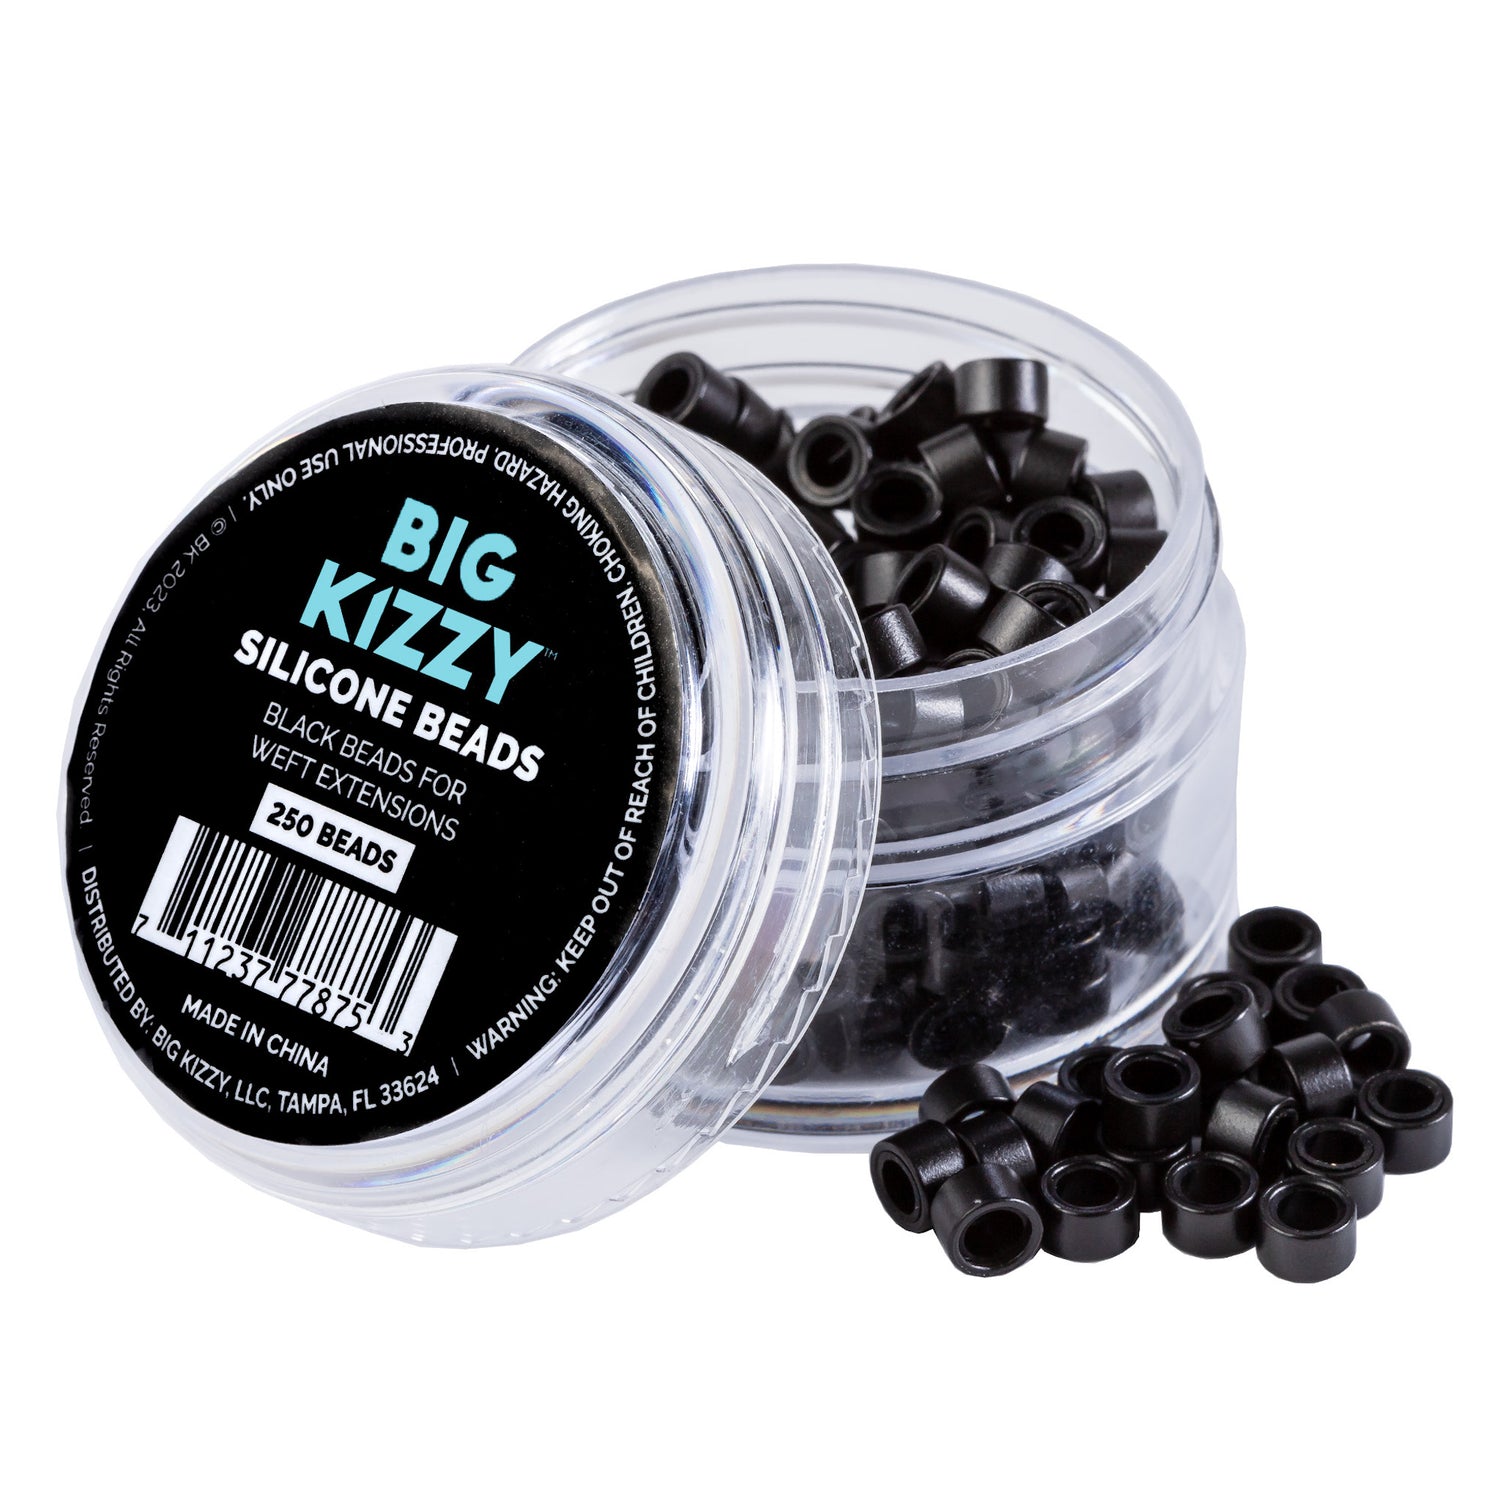 An opened jar of 250 Black Beads for Weft Extensions with some beads next to the jar